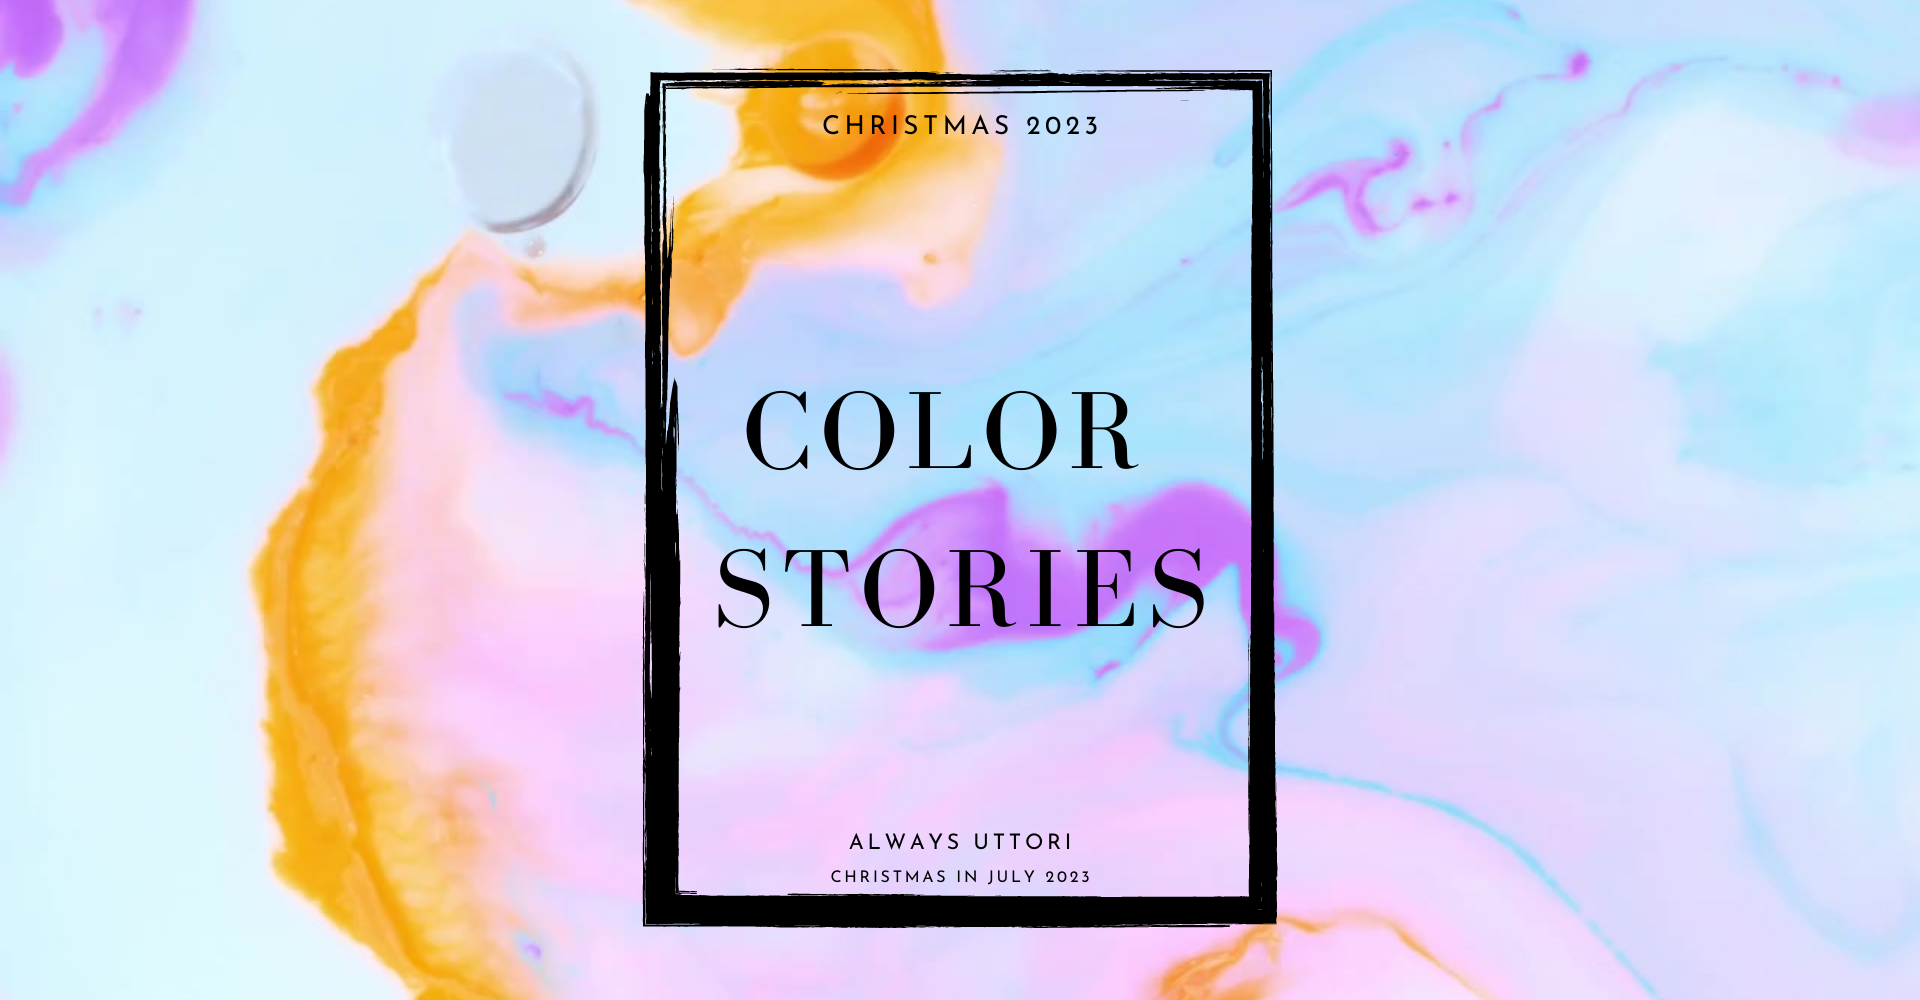 Always Uttori Christmas 2023 Color Stories/Trends